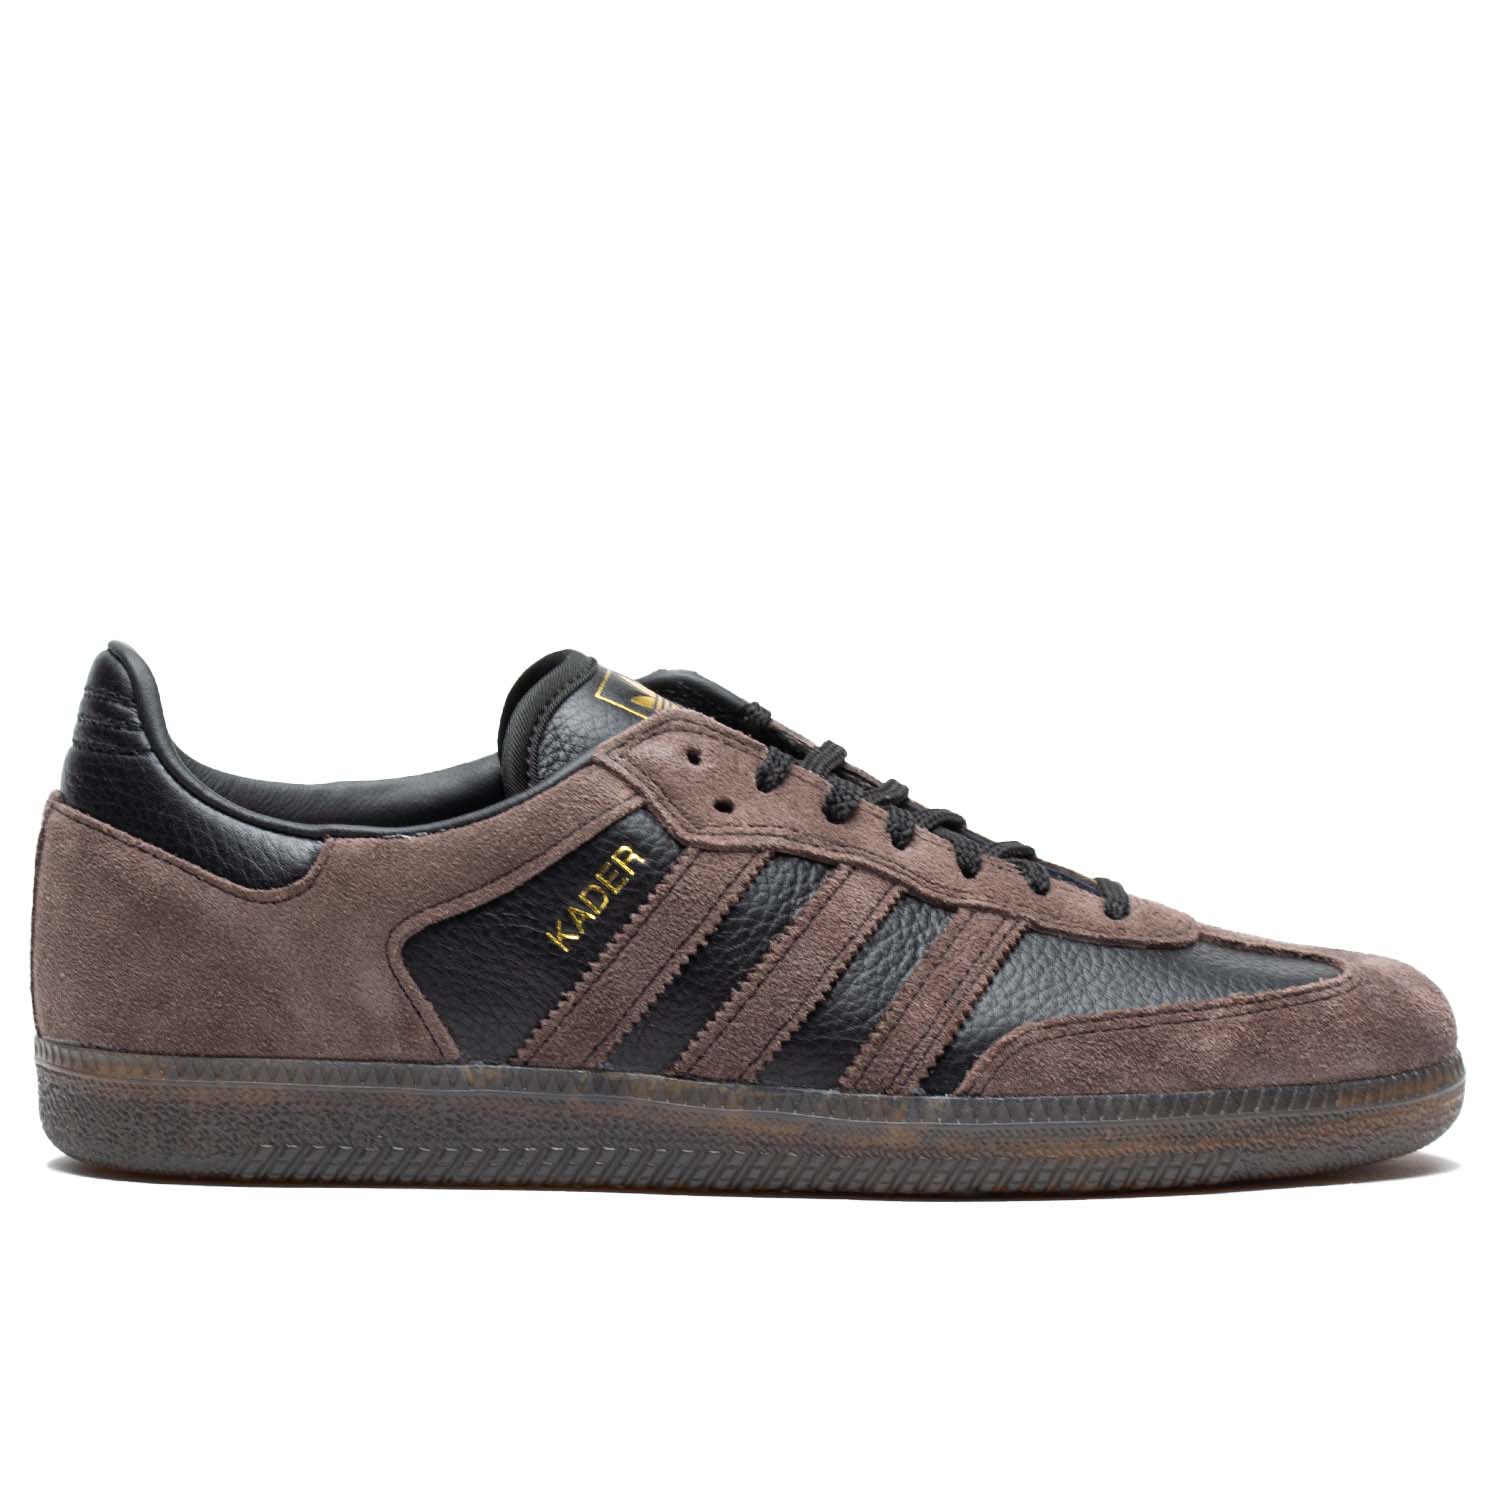 Brown suede Adidas skateboarding Shoe. Samba skateboardings shoe with black leather details and clear rubber sole.